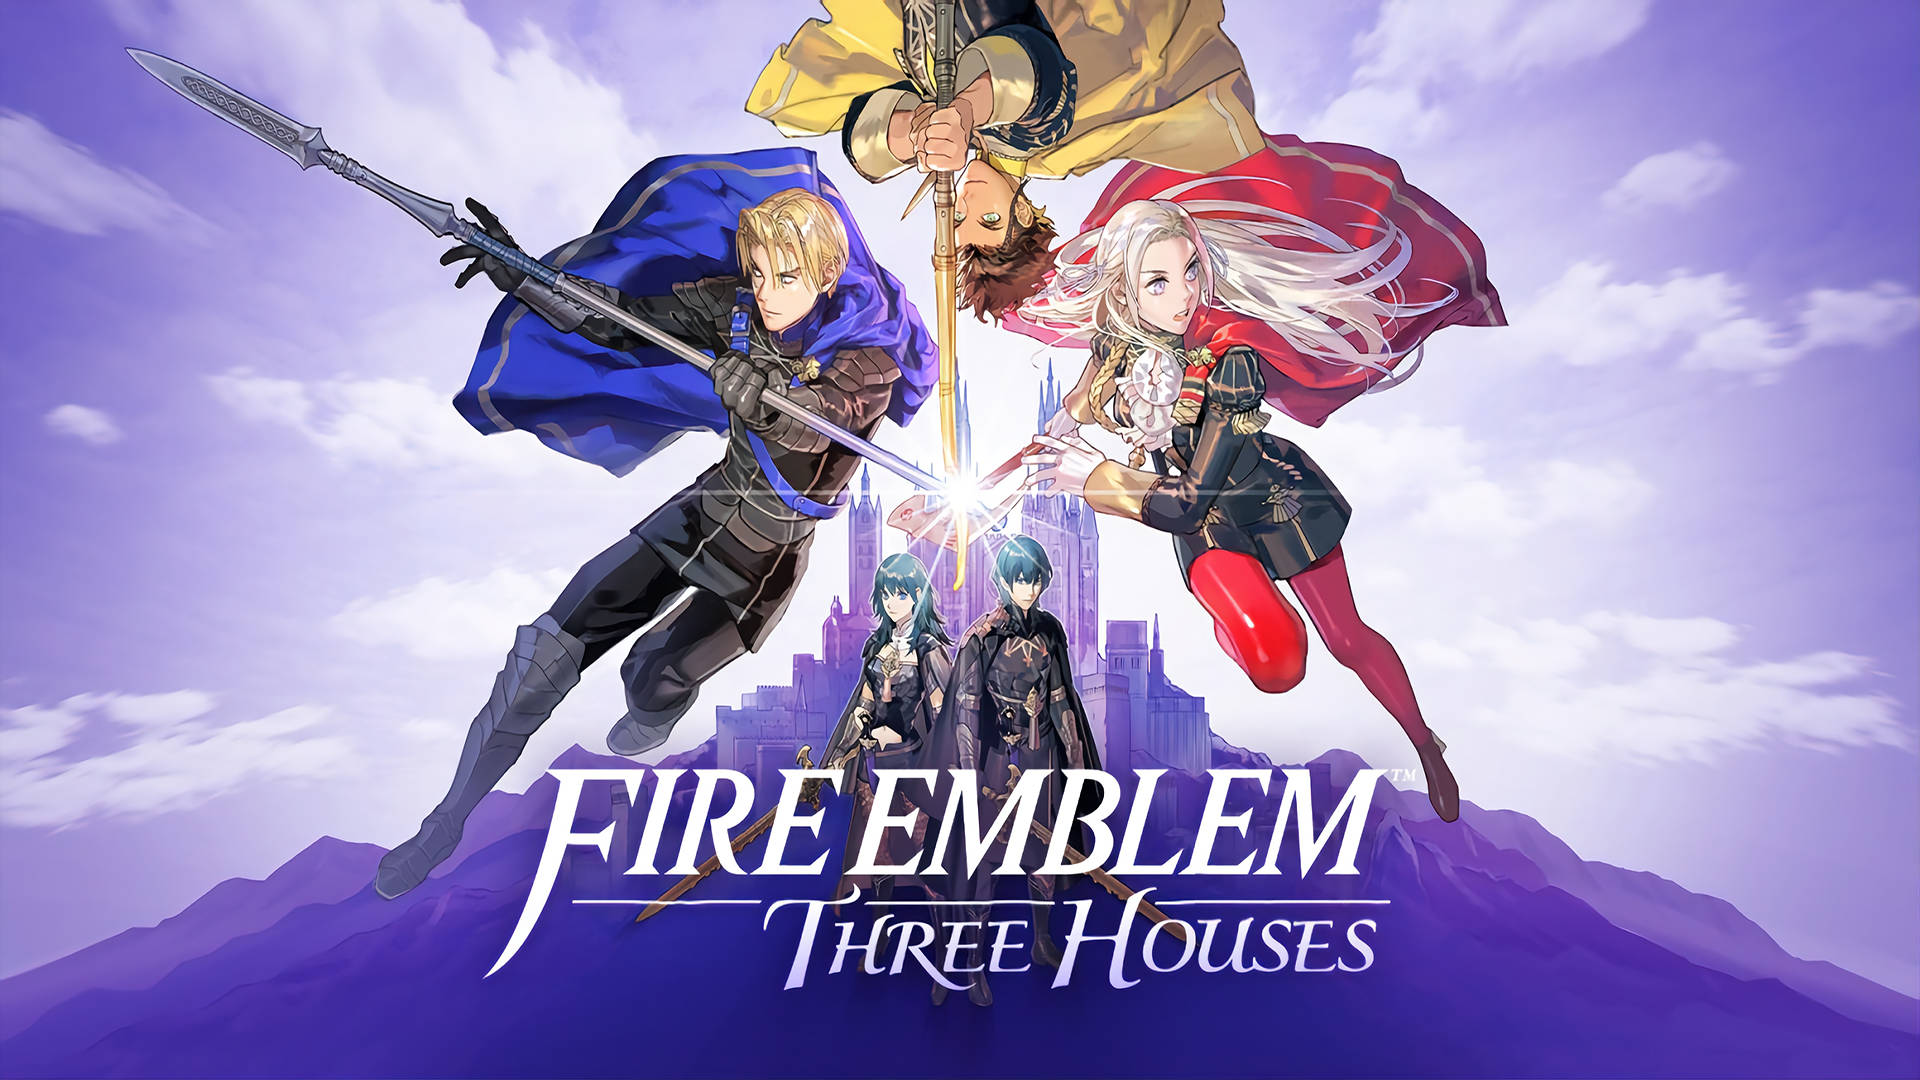 Top 999+ Fire Emblem Three Houses Wallpapers Full HD, 4K✅Free to Use